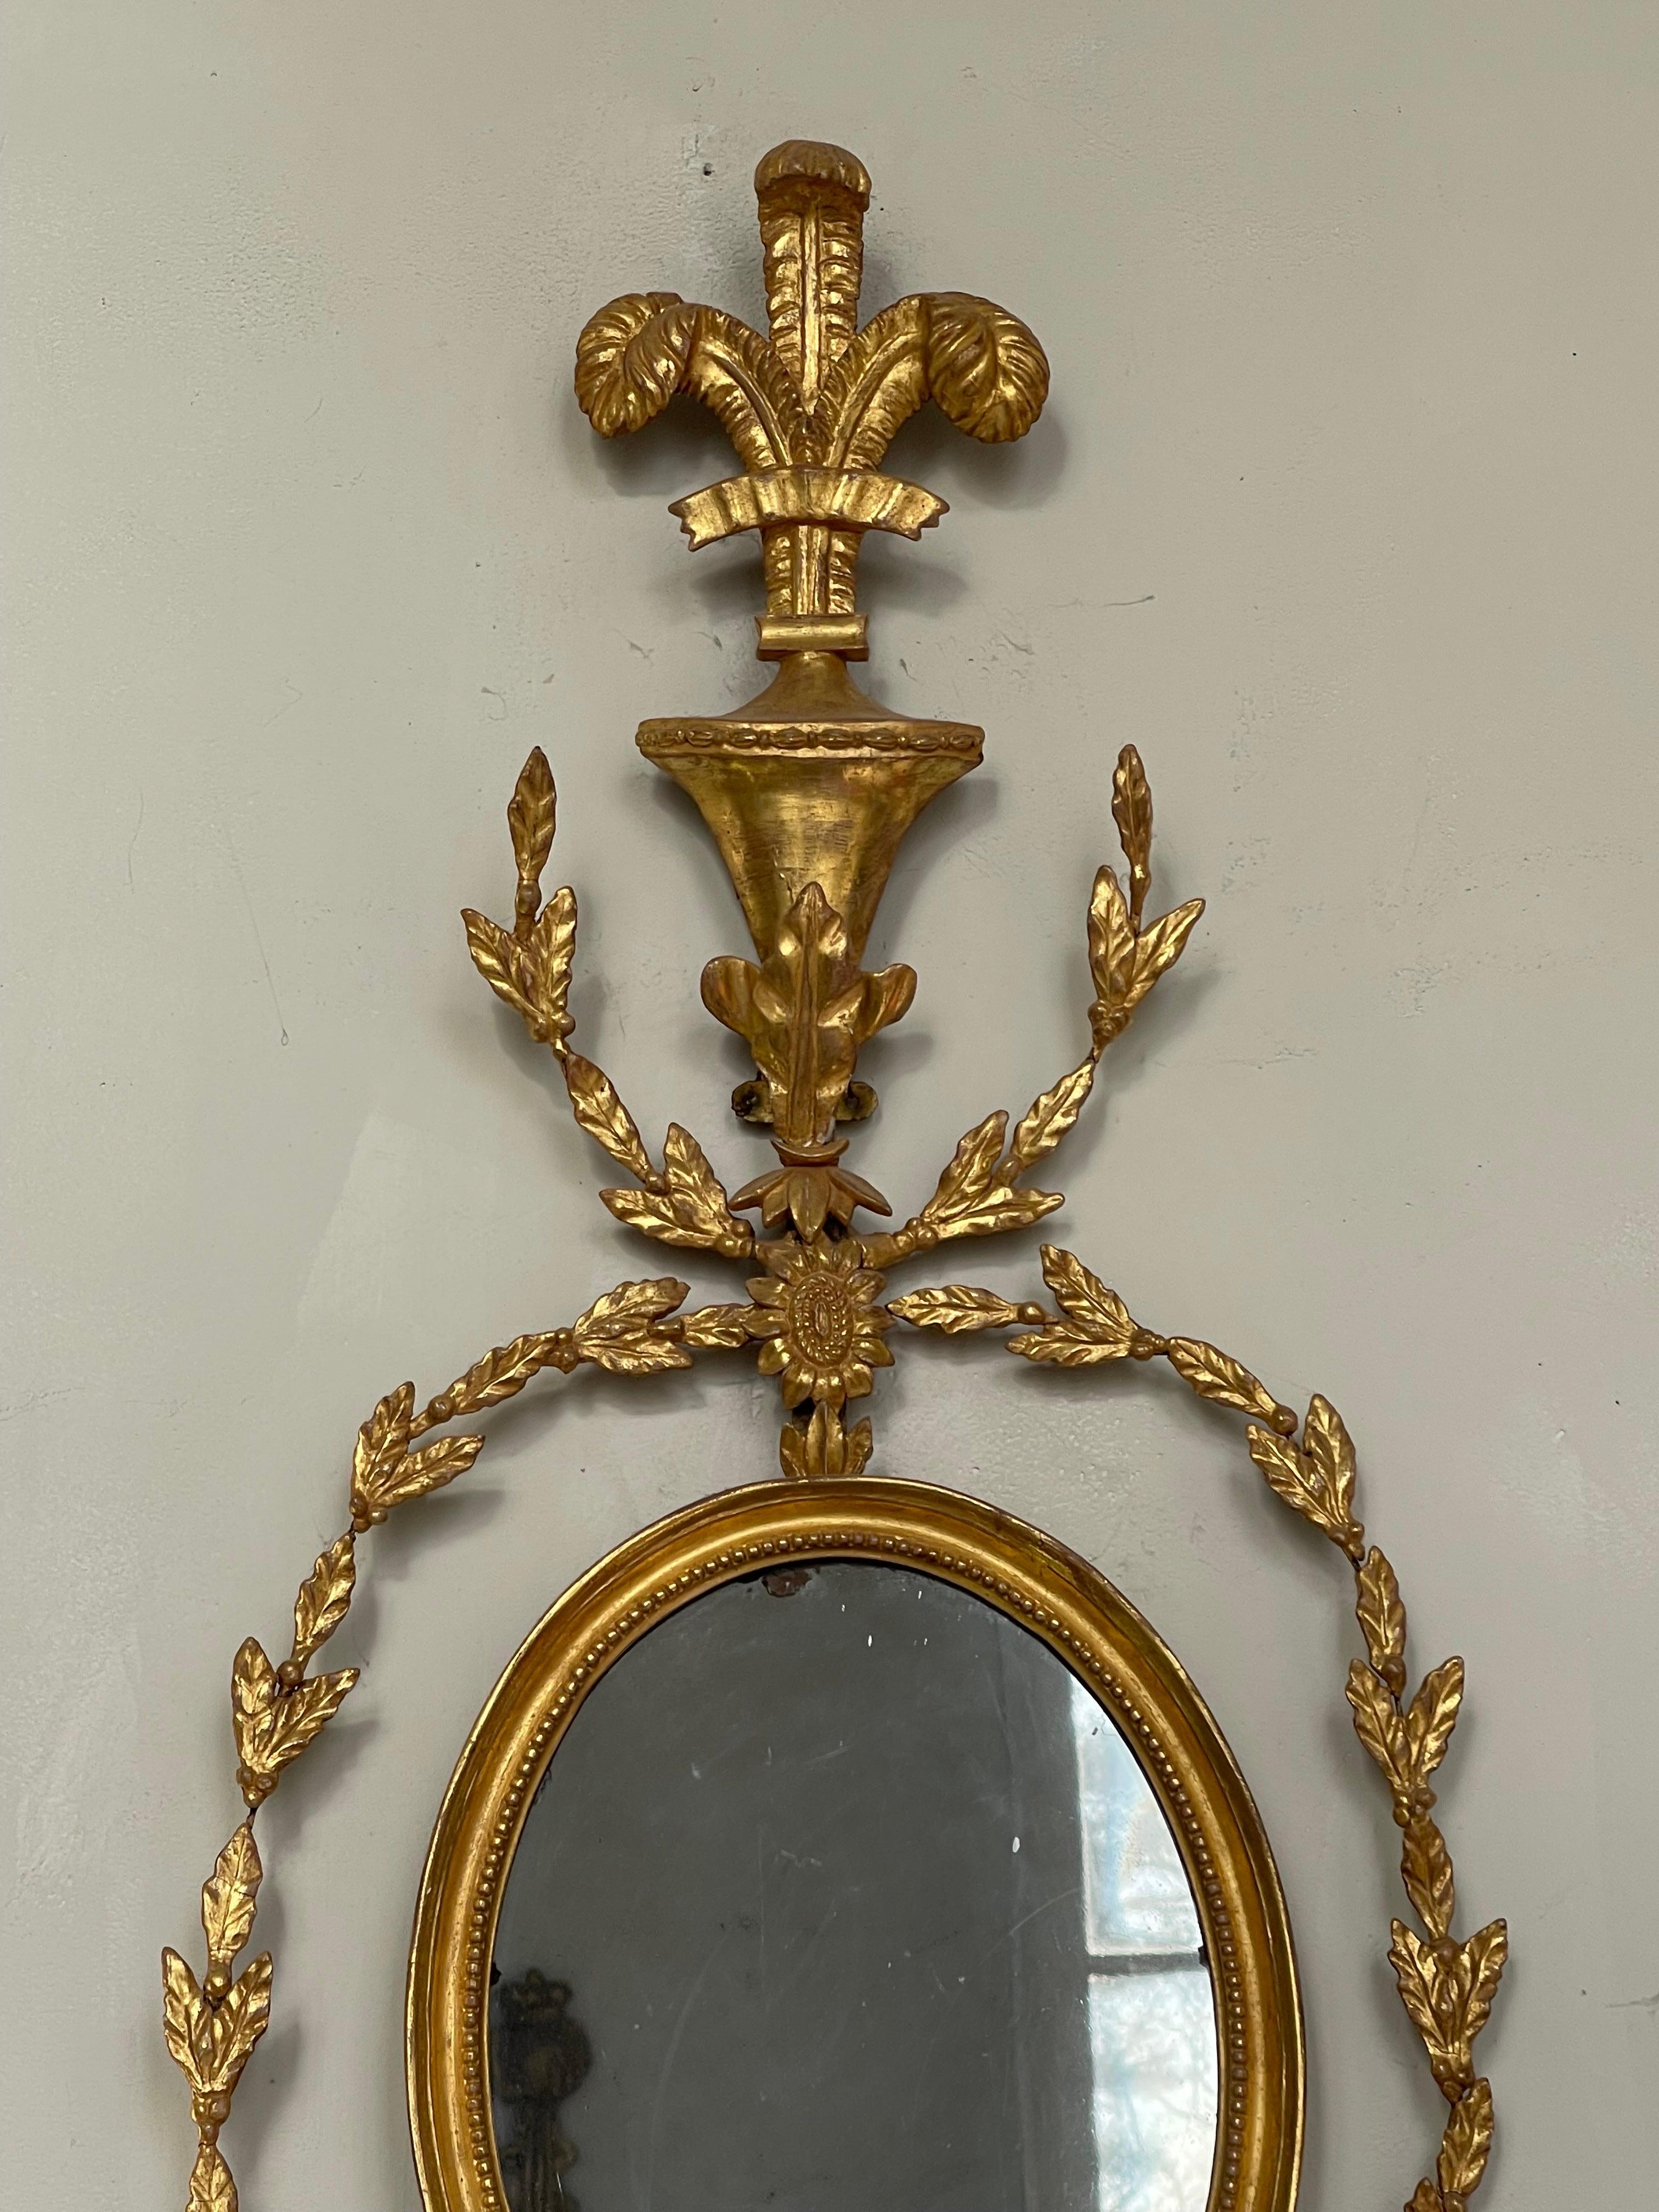 This extremely rare pair of giltwood girandole mirrored wall sconces is English and was produced in the early 19th century in the Adam style.
A bracket supports a foot tall oval framed looking glass surrounded by intertwined Laurel swags. Then from